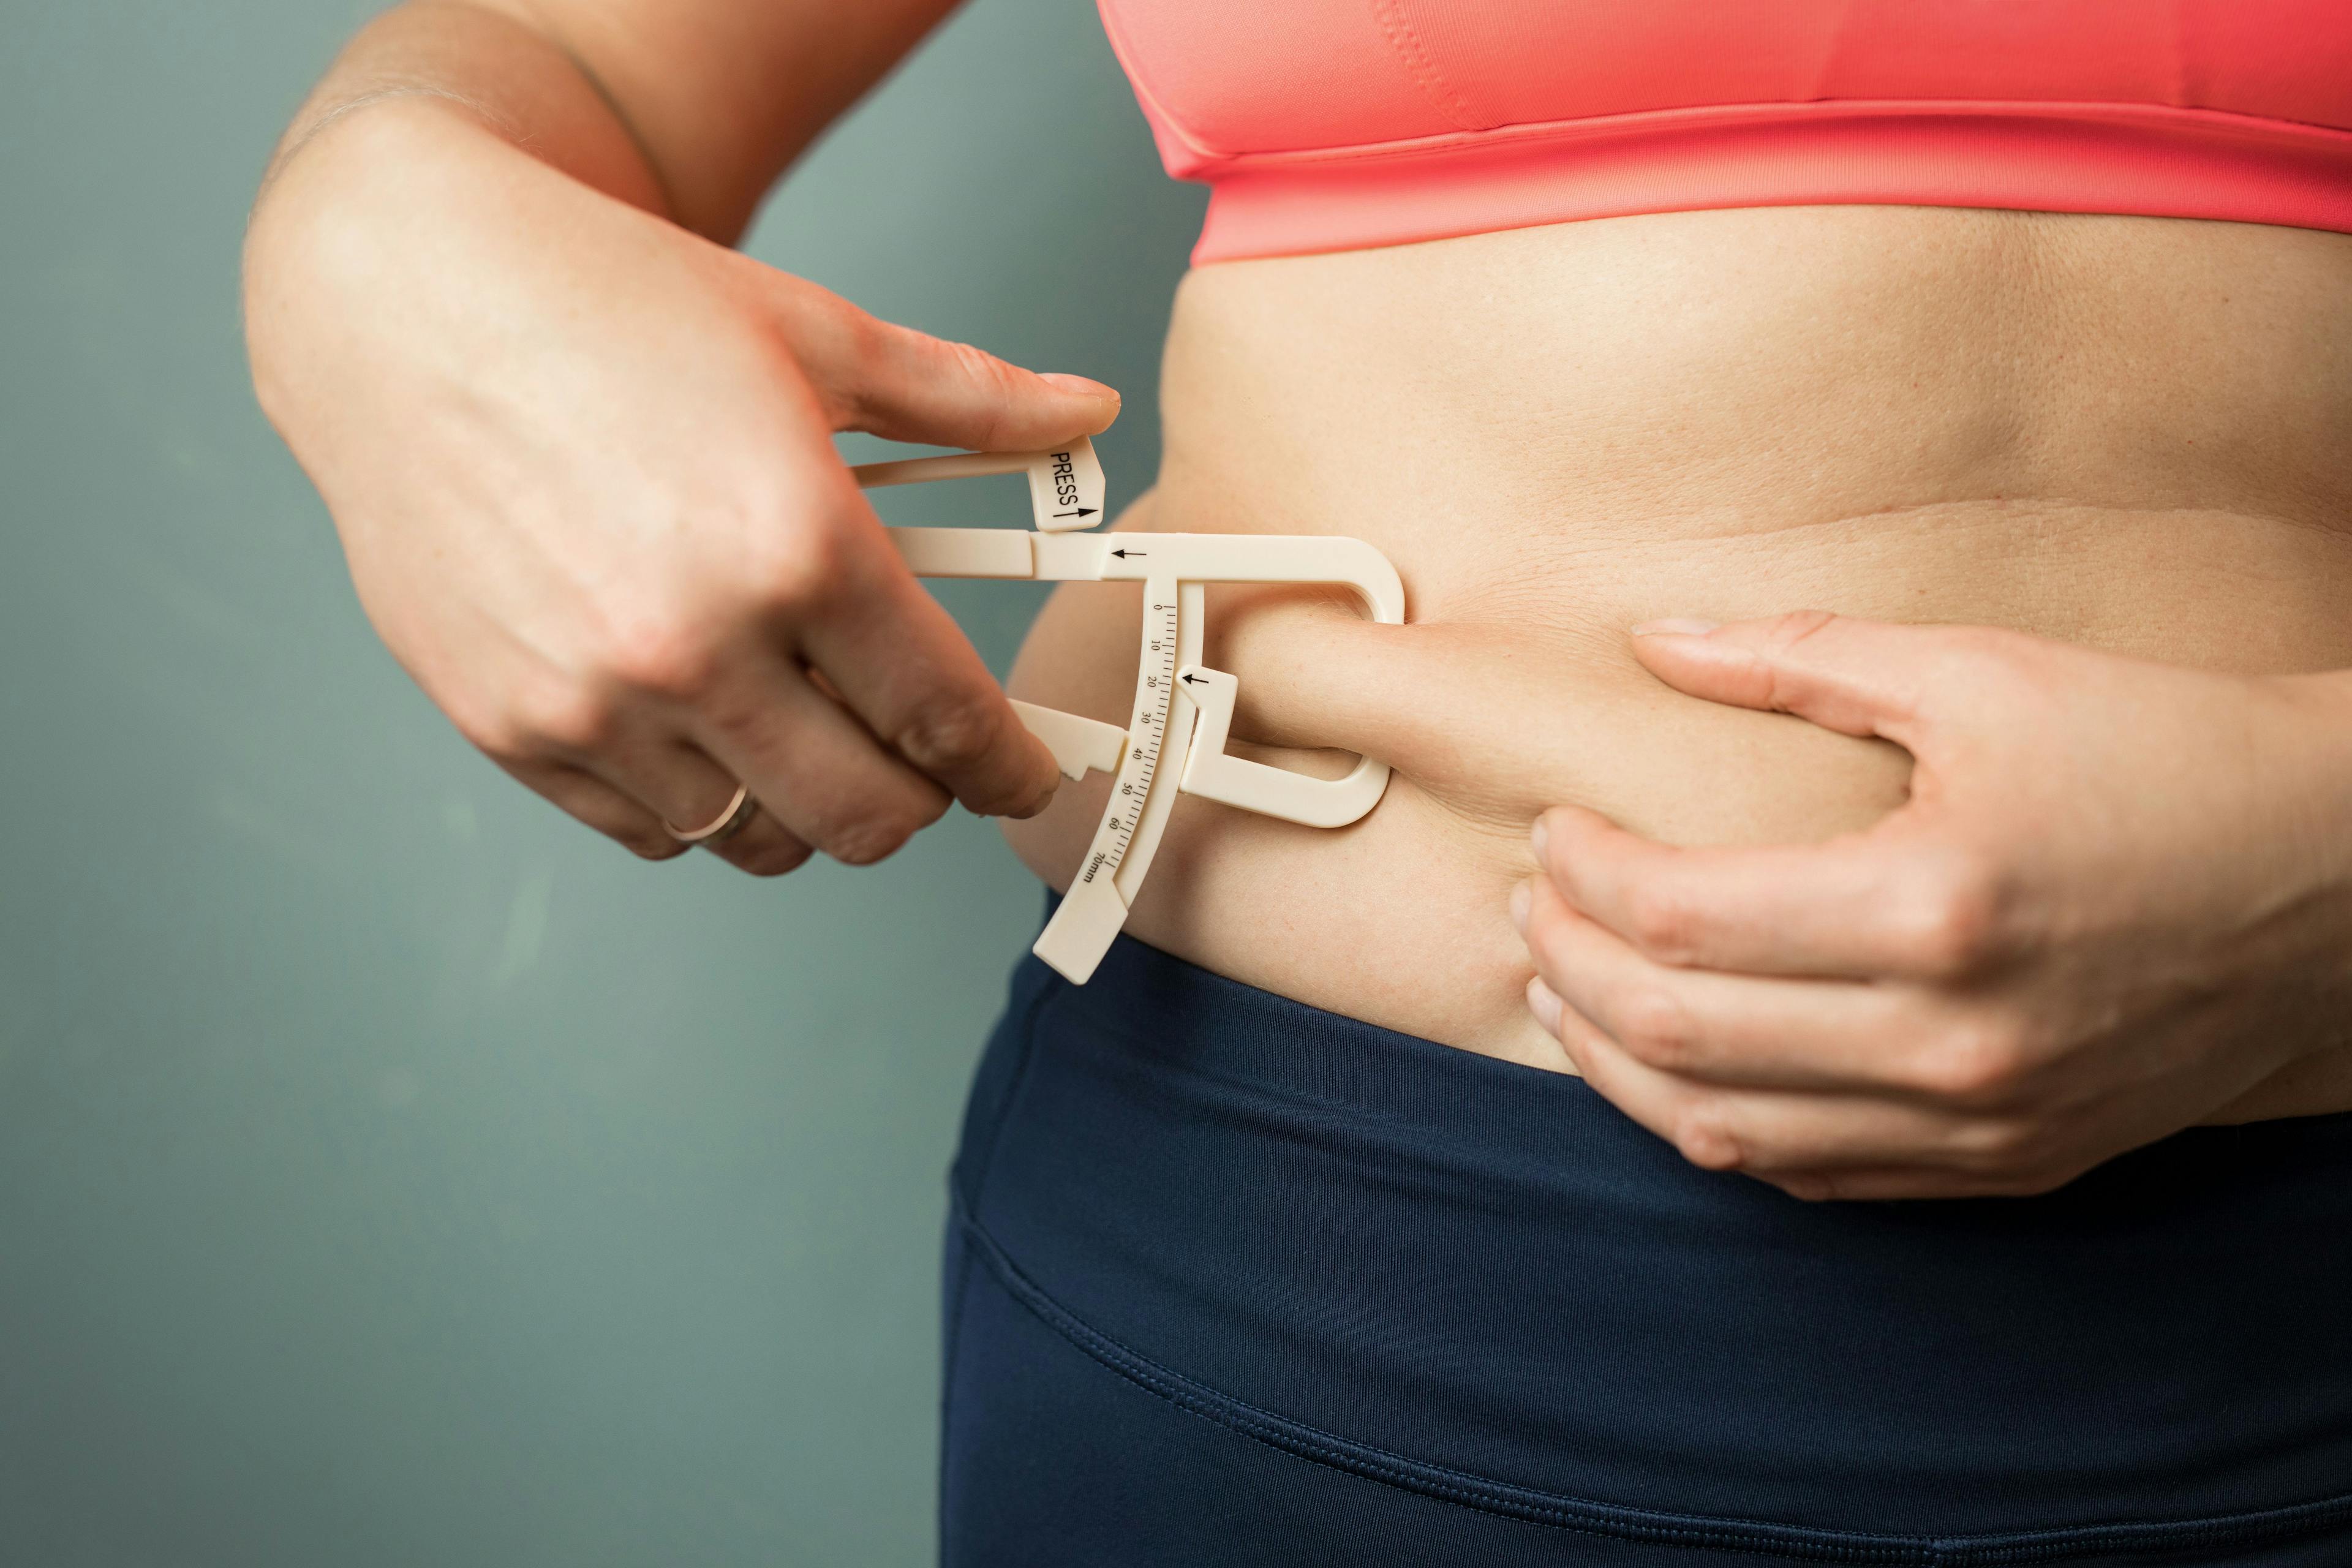 Is body fat linked to endometriosis?